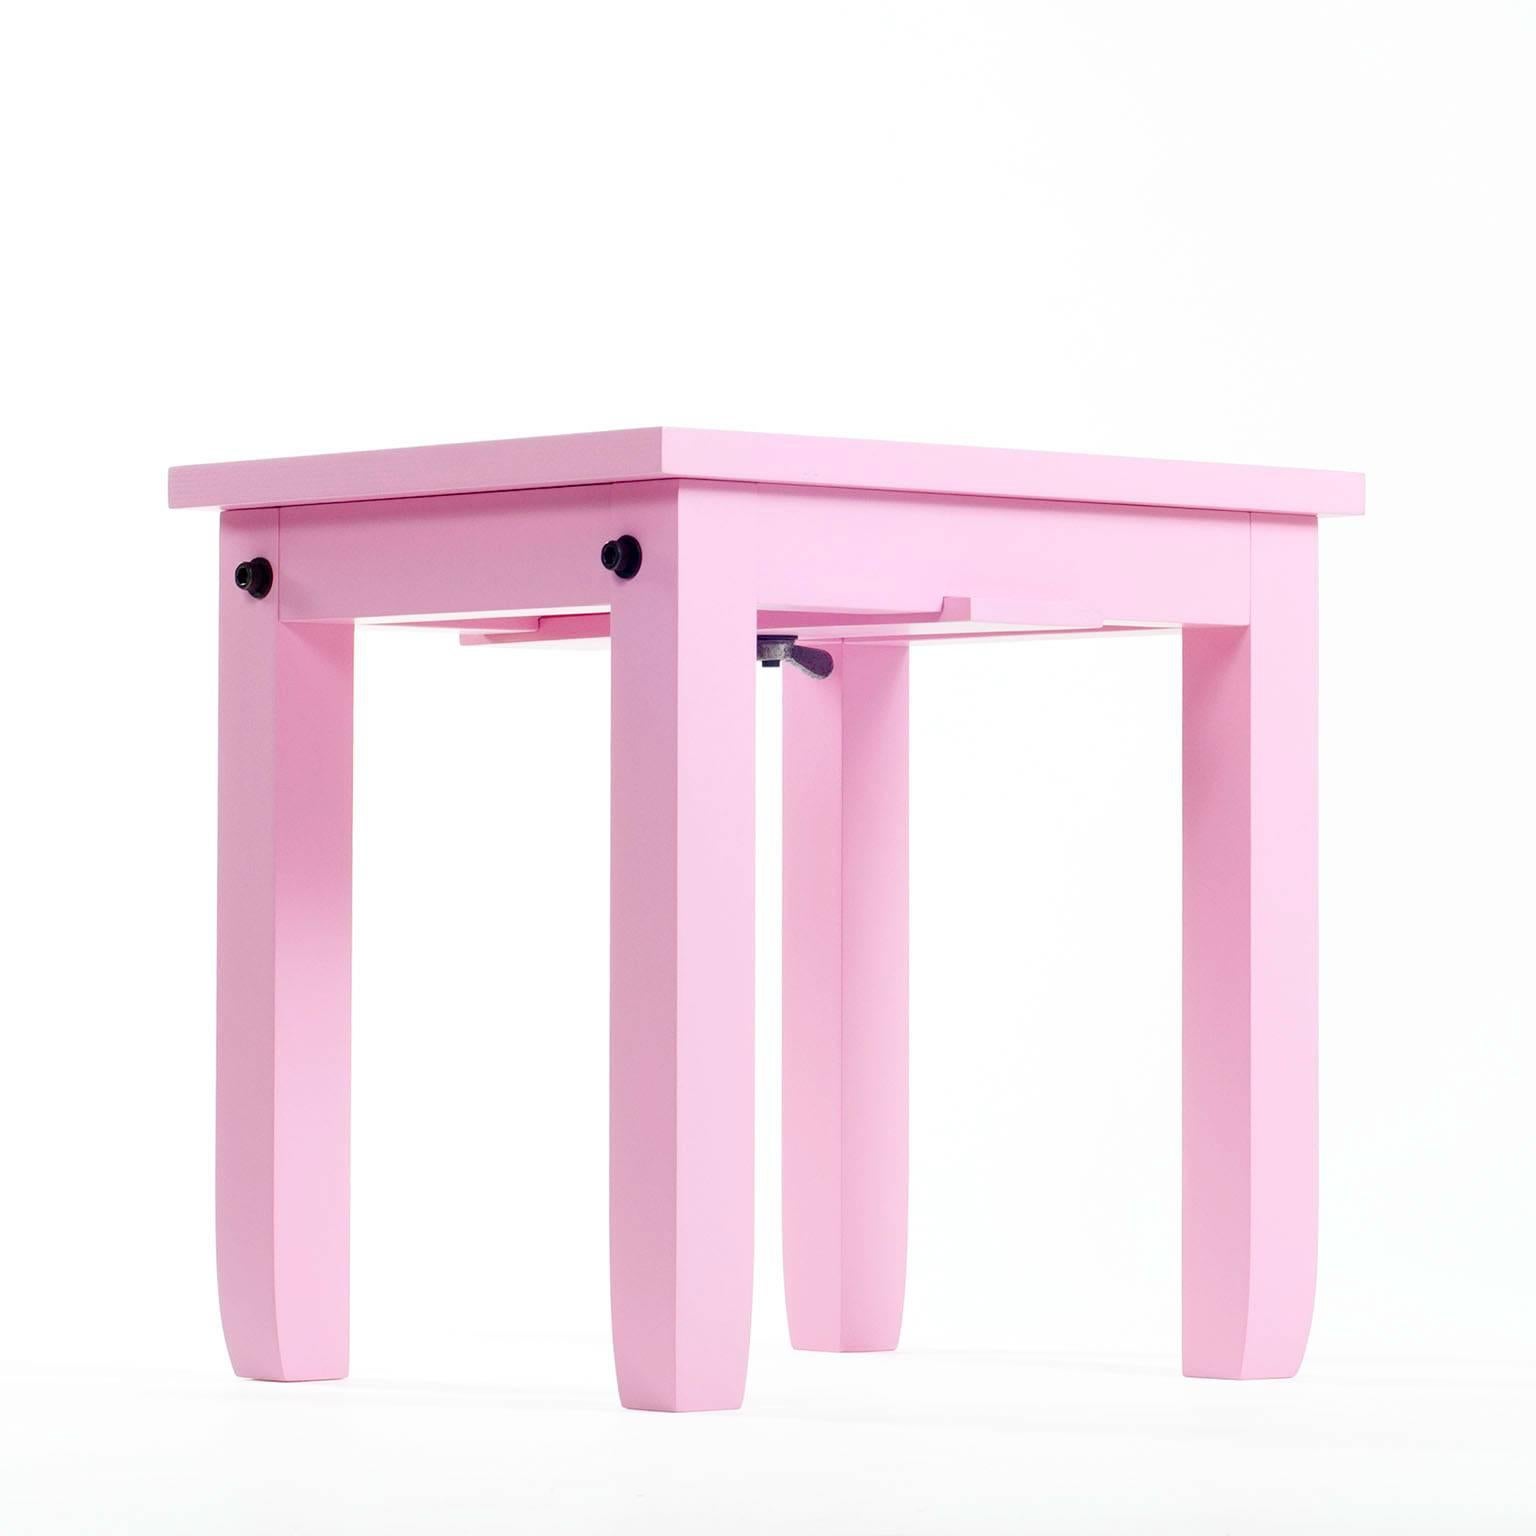 American Contemporary Pussyhat Pink Benchlet Stool or Bench Made in Brooklyn in Stock For Sale